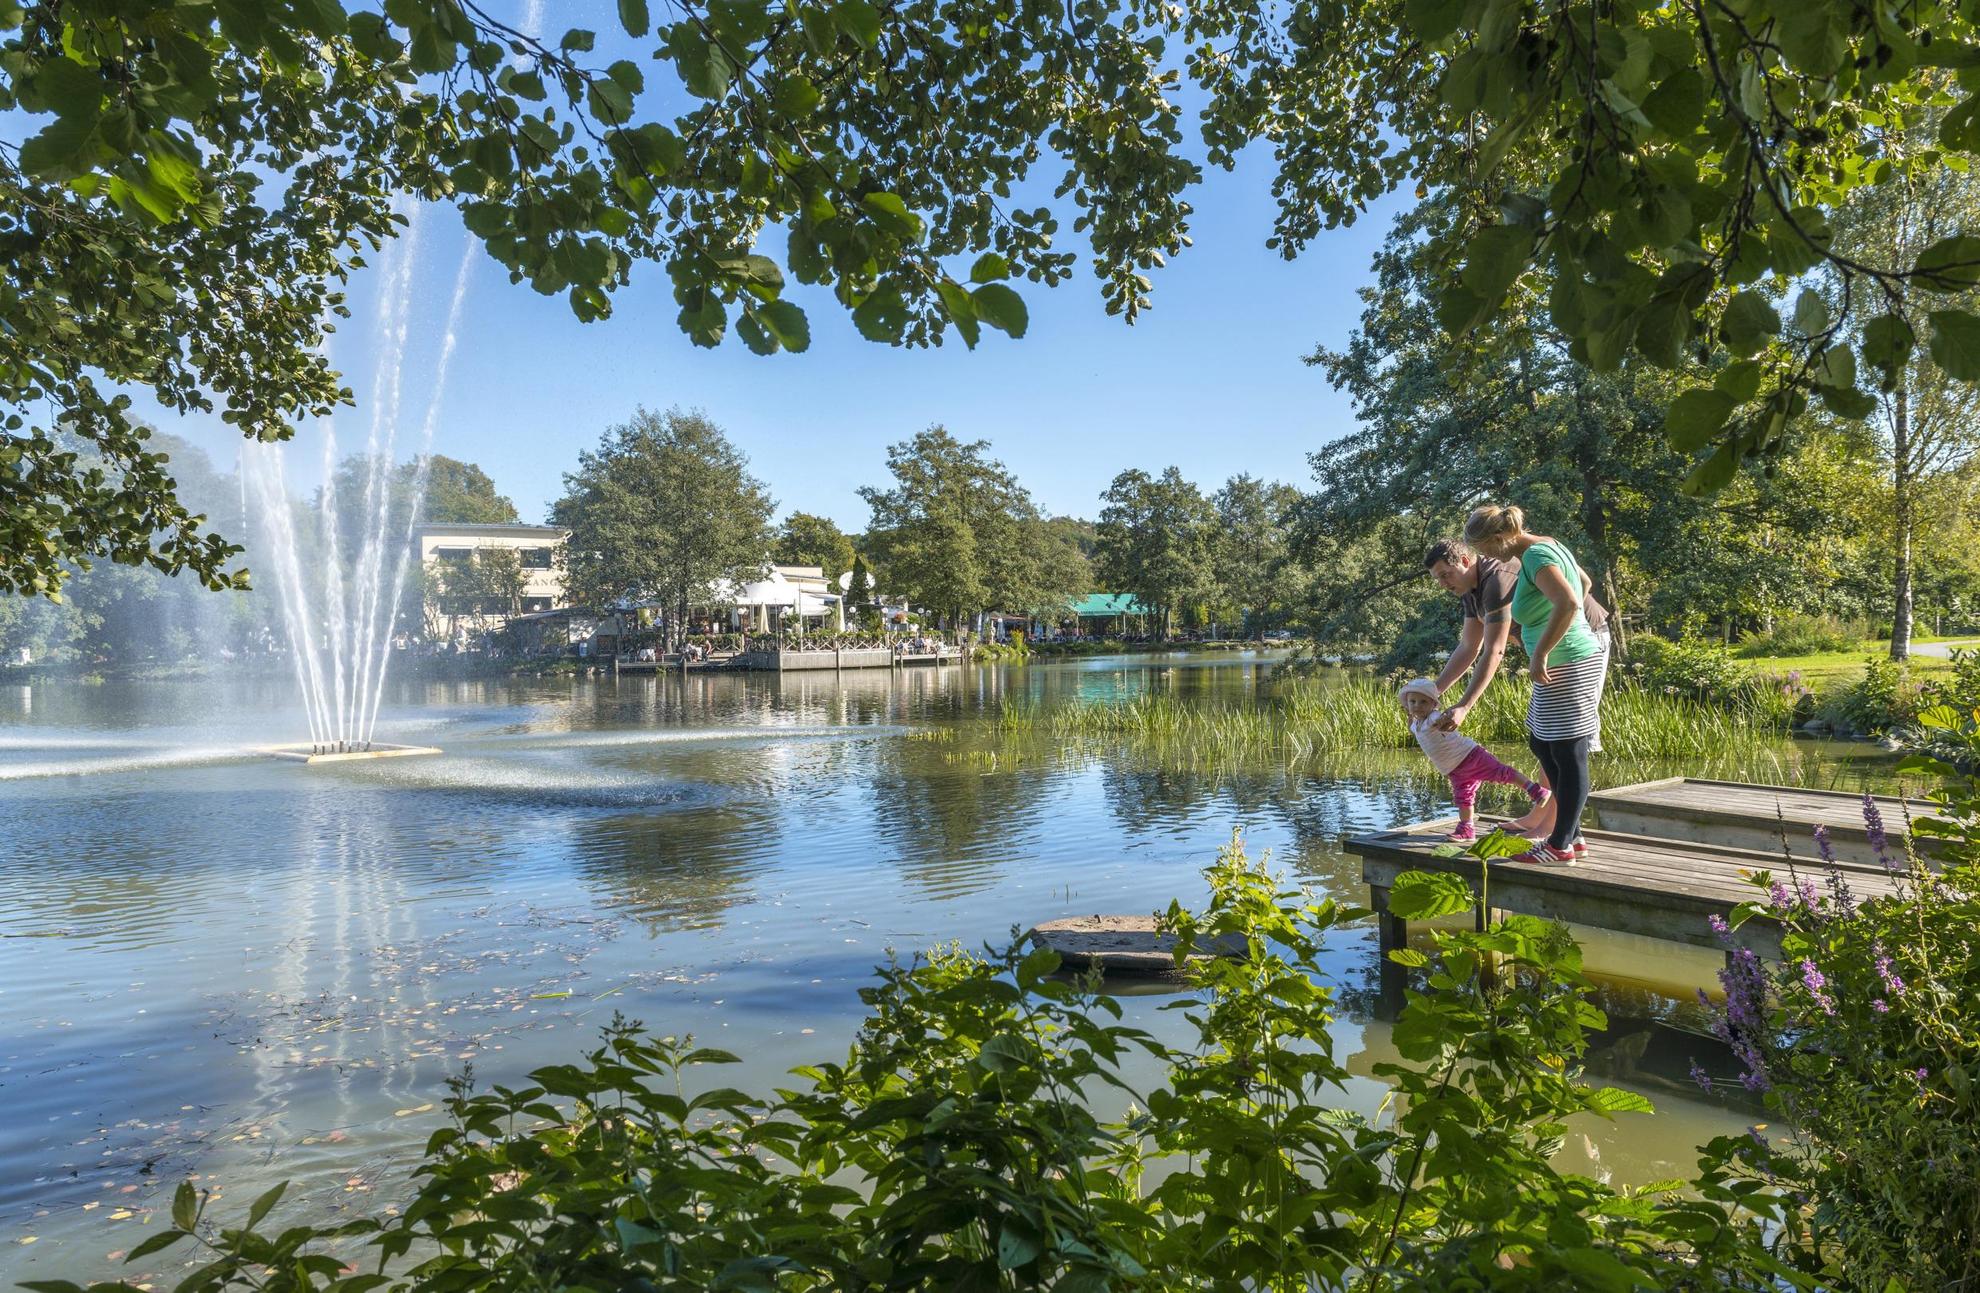 A couple with a small child standing on a jetty next to a pond with a fountain, surrounded by greenery in the park Slottsskogen. In the background you see an outdoor restaurant.